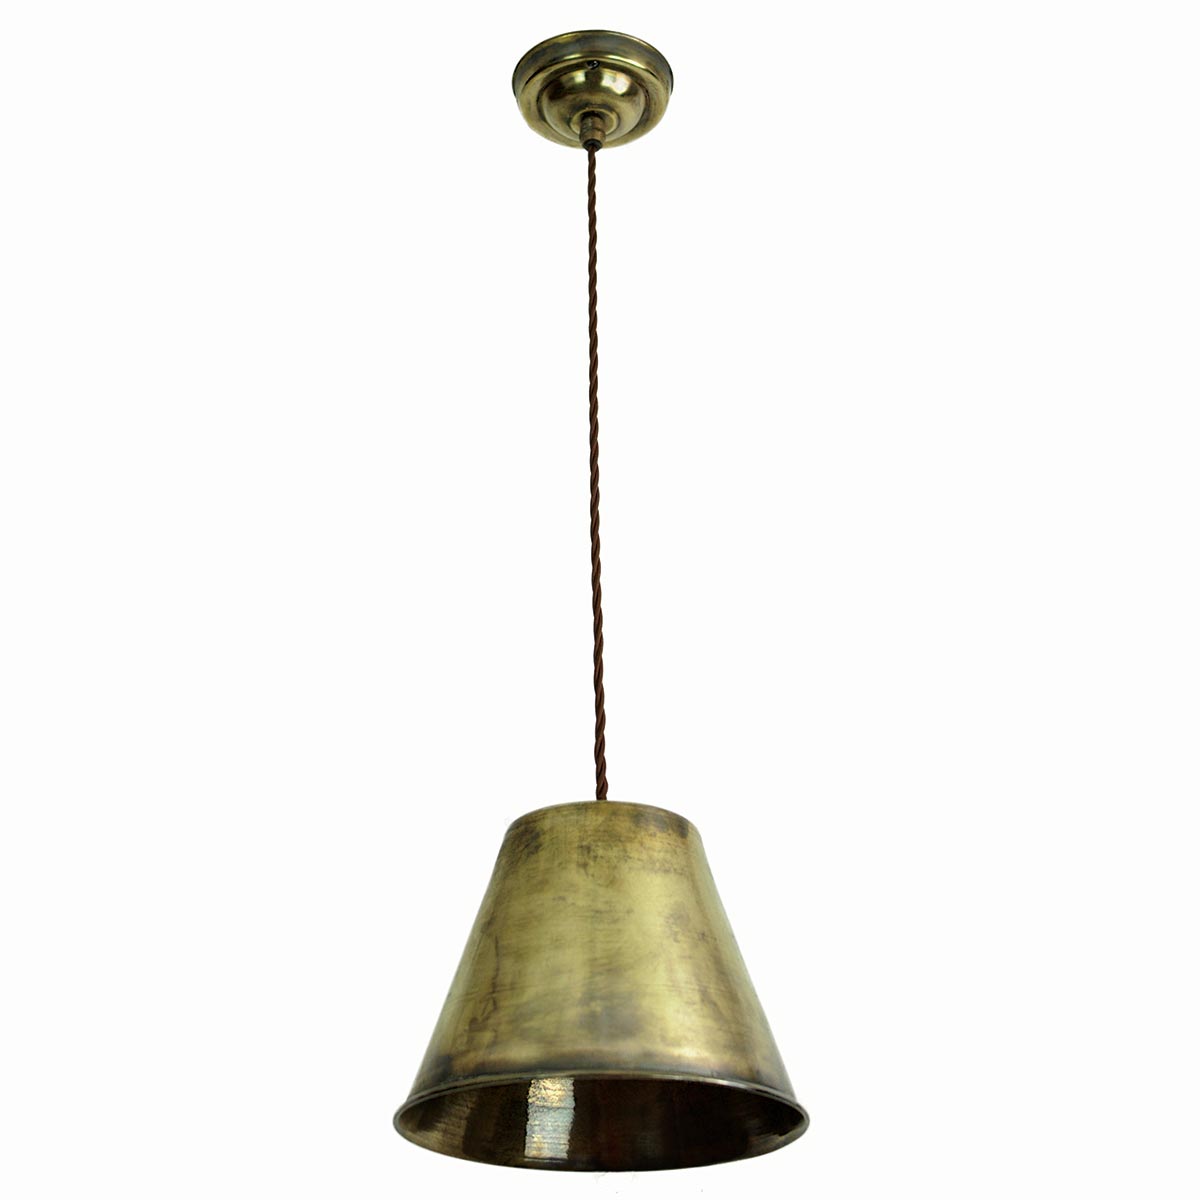 Map Room Nautical 1 Light Ceiling Pendant Solid Antique Brass